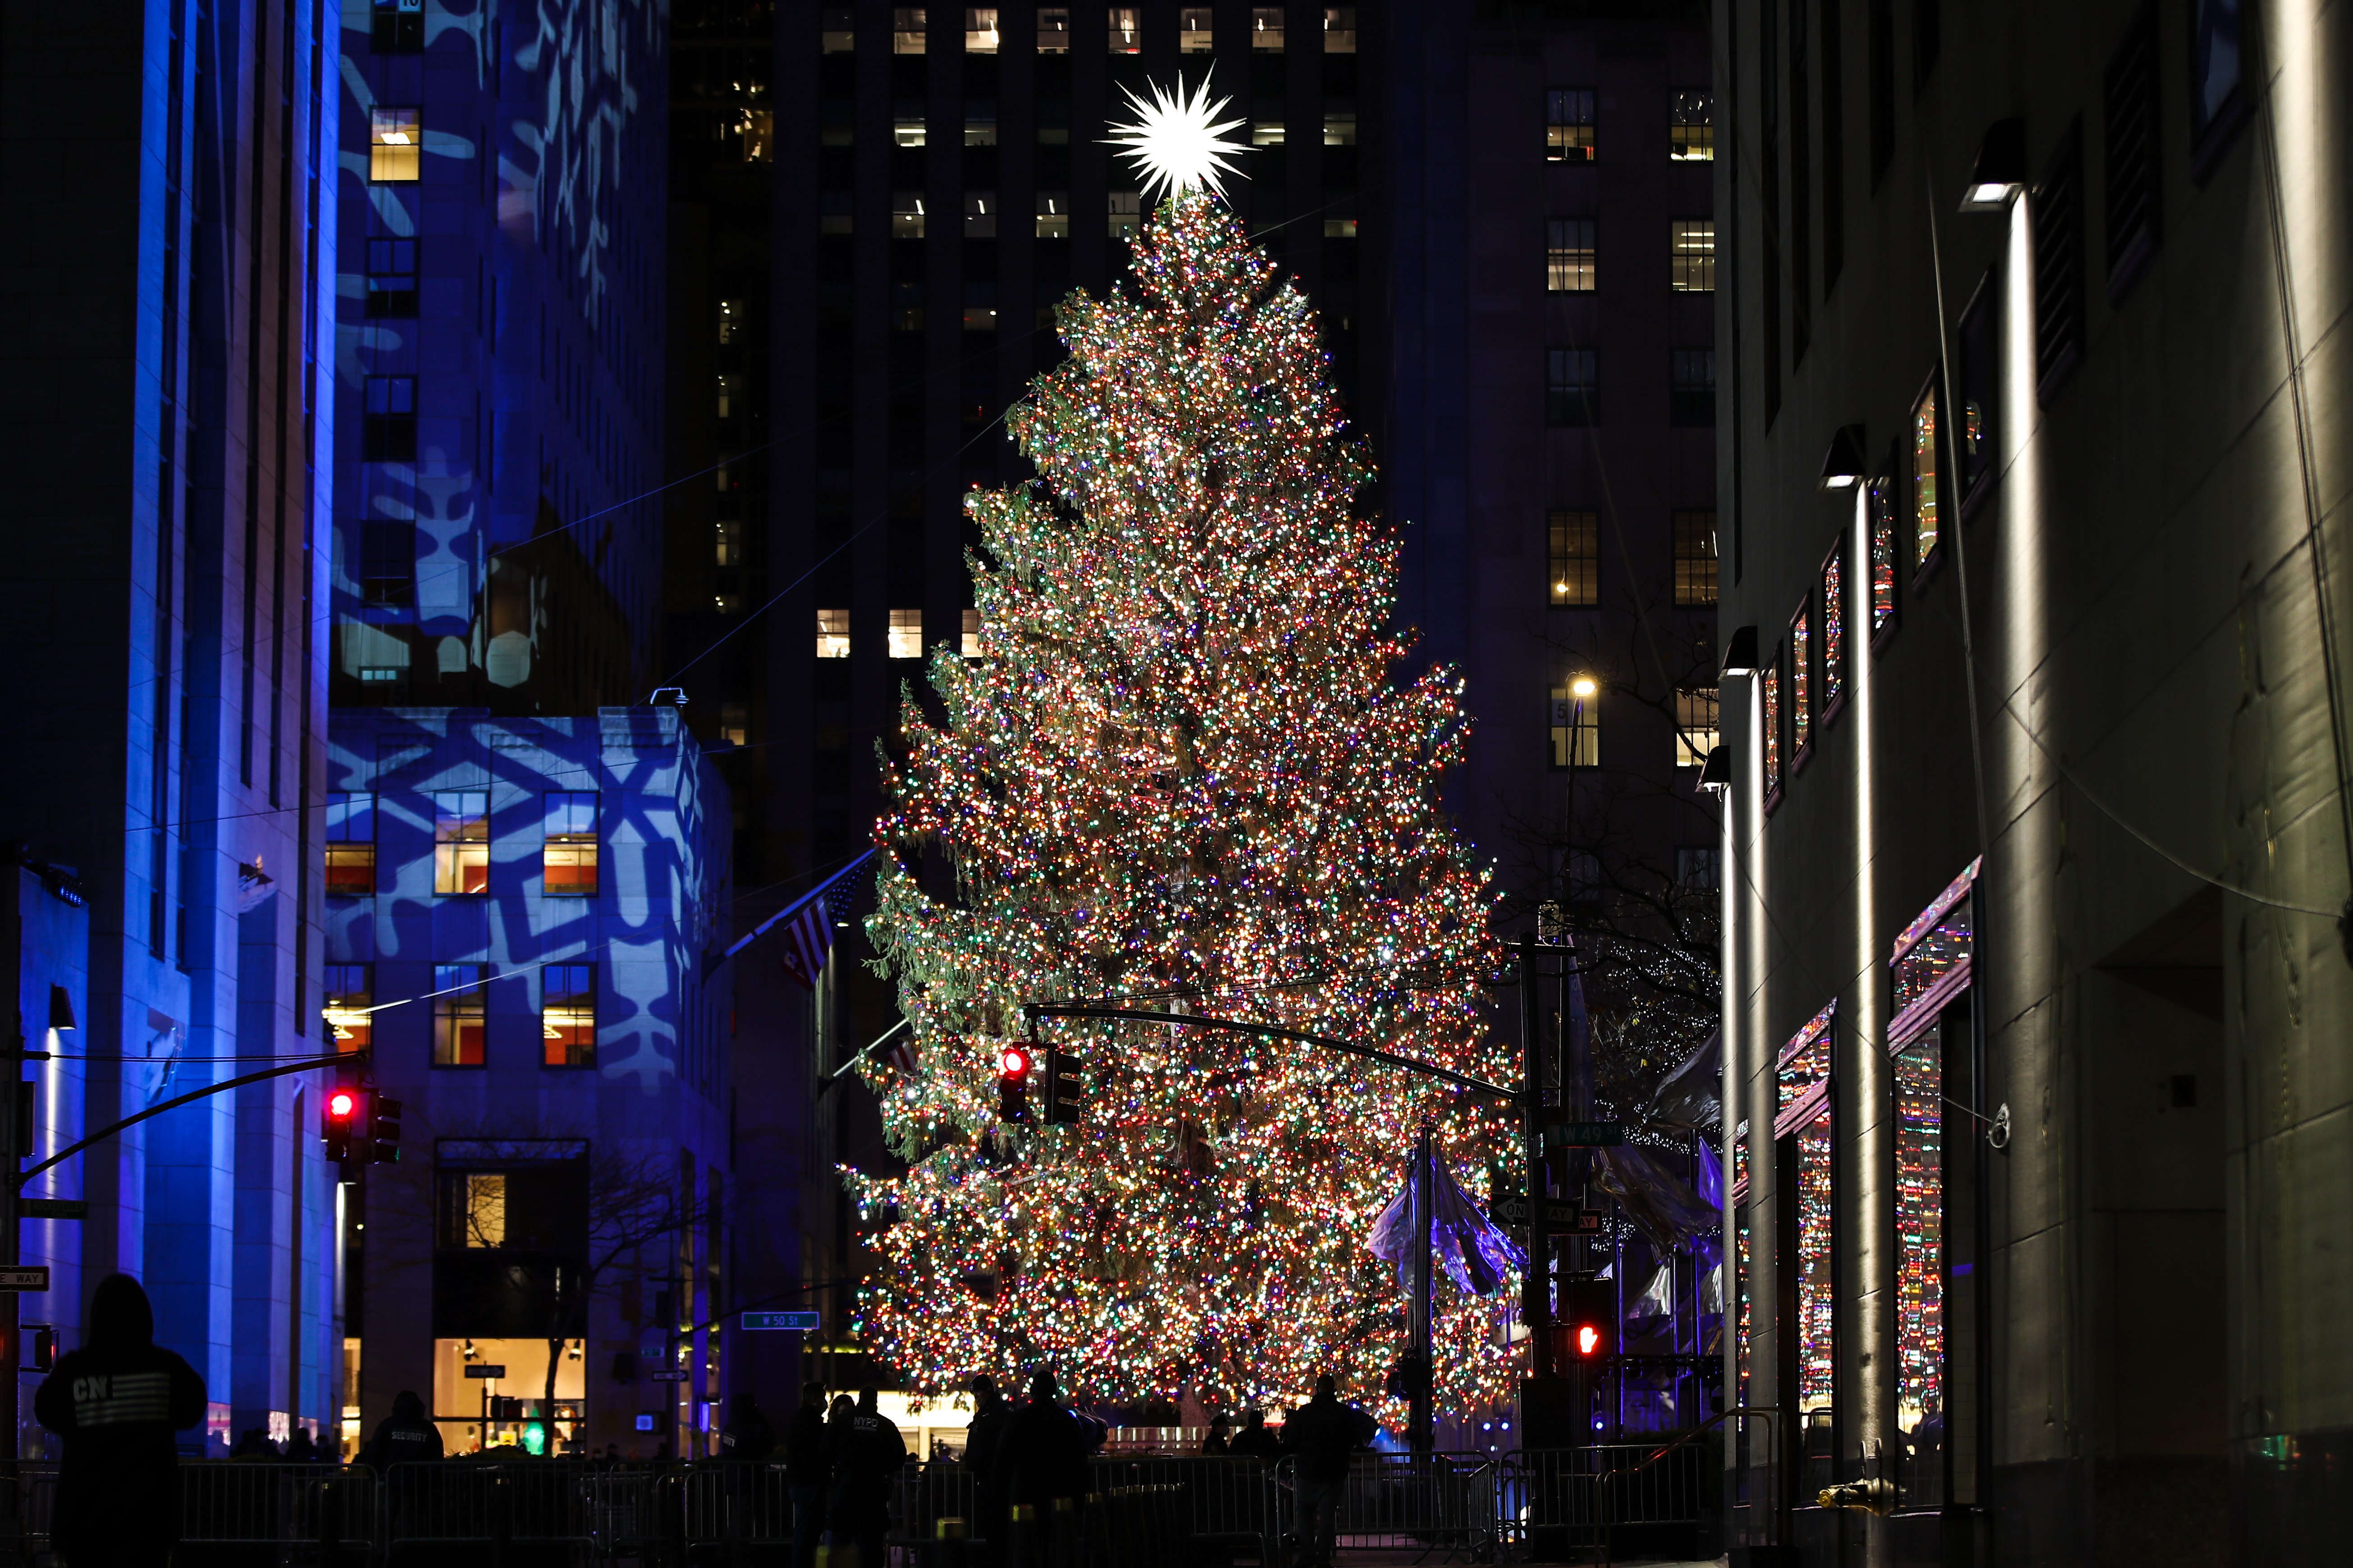 A view of the Rockefeller Center Christmas Tree during the 88th Annual Rockefeller Center Christmas Tree Lighting Ceremony in New York City, United States on December 2, 2020. | Source: Getty Images.